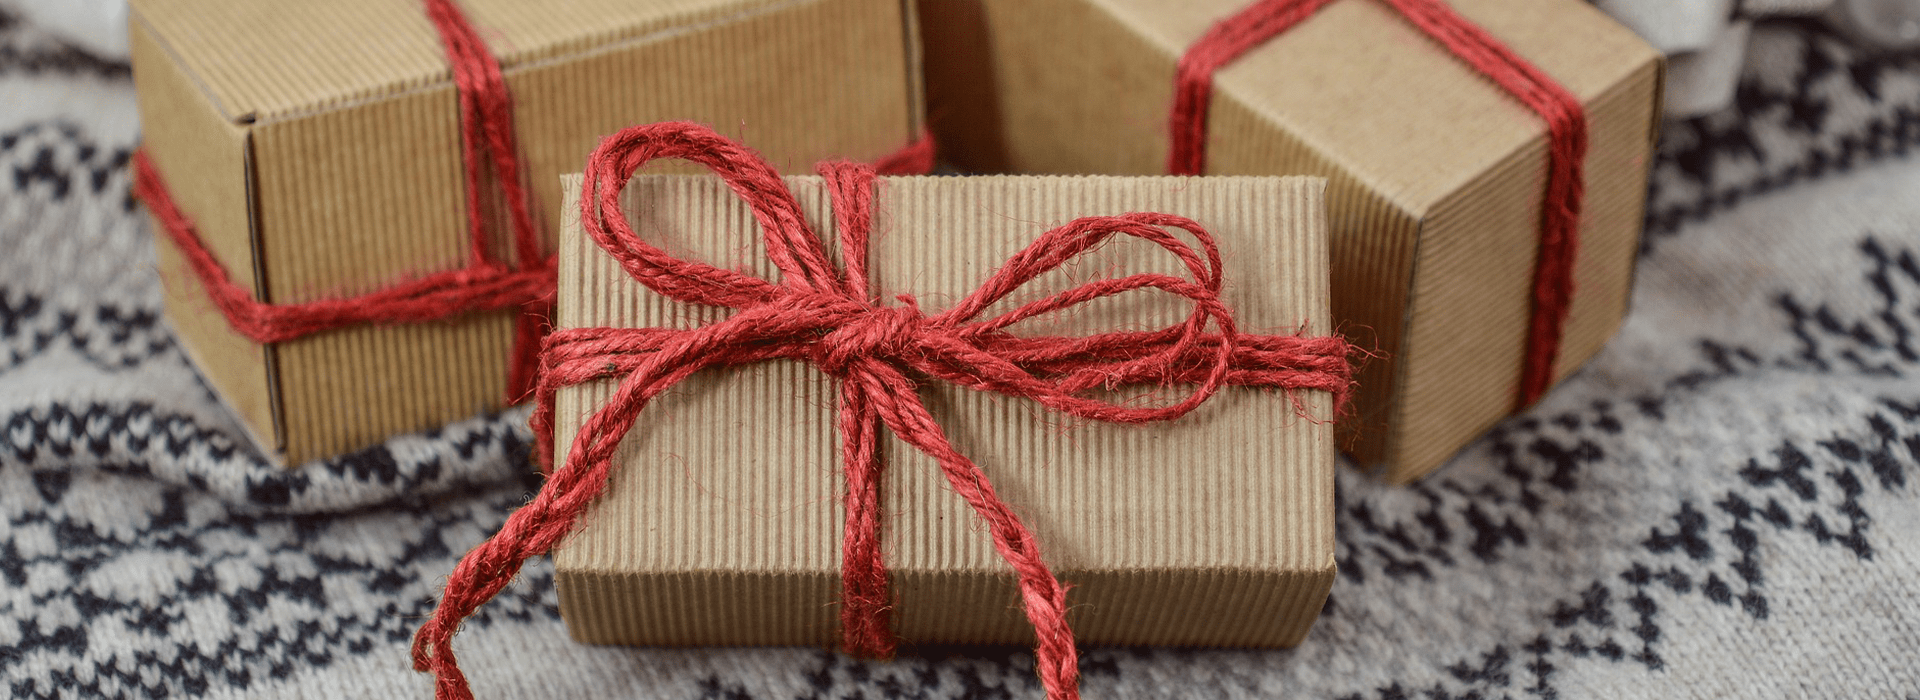 Three small packages wrapped in red ribbon.